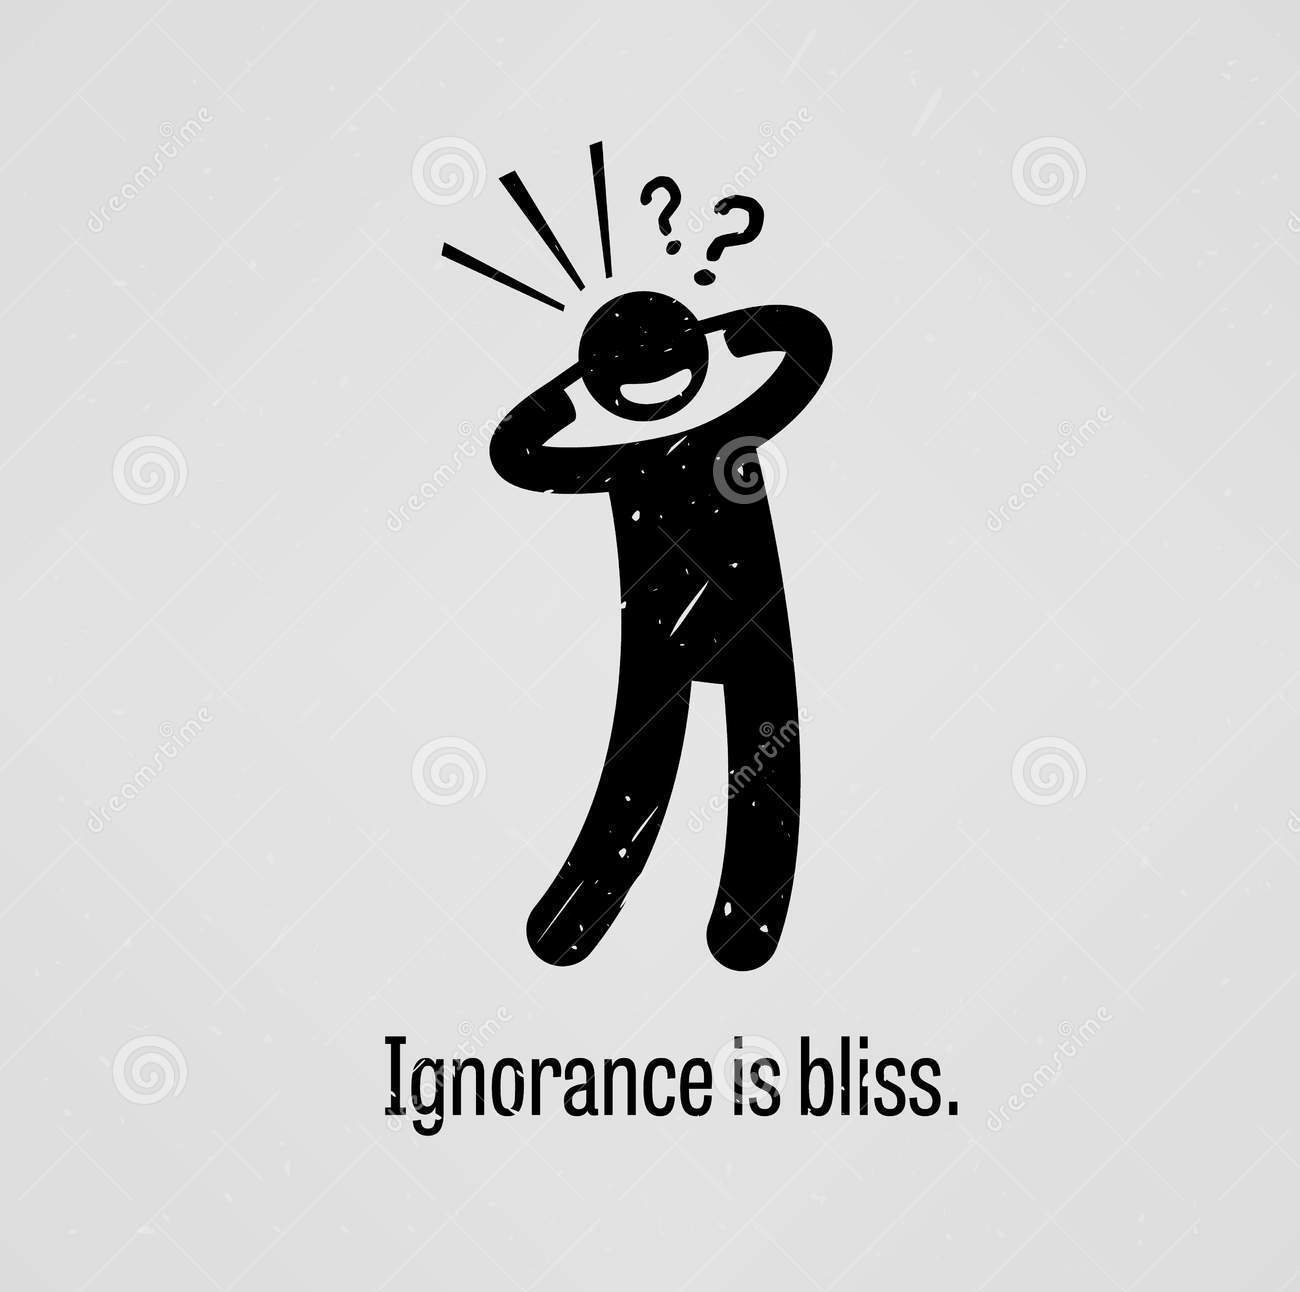 ignorance-bliss-motivational-inspirational-poster-representing-proverb-sayings-simple-human-pi...jpg